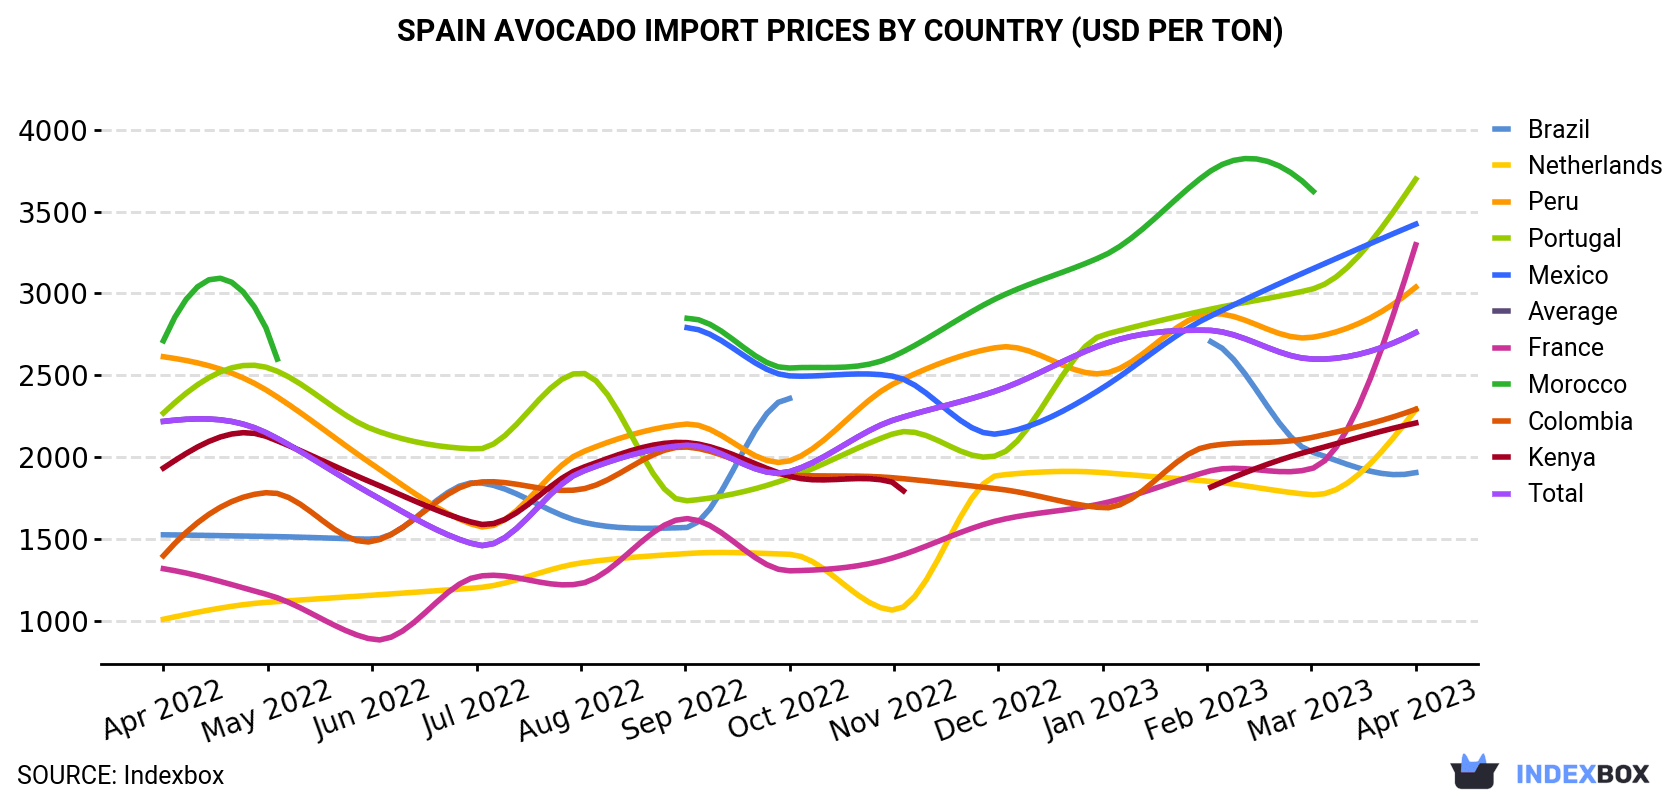 Spain Avocado Import Prices By Country (USD Per Ton)